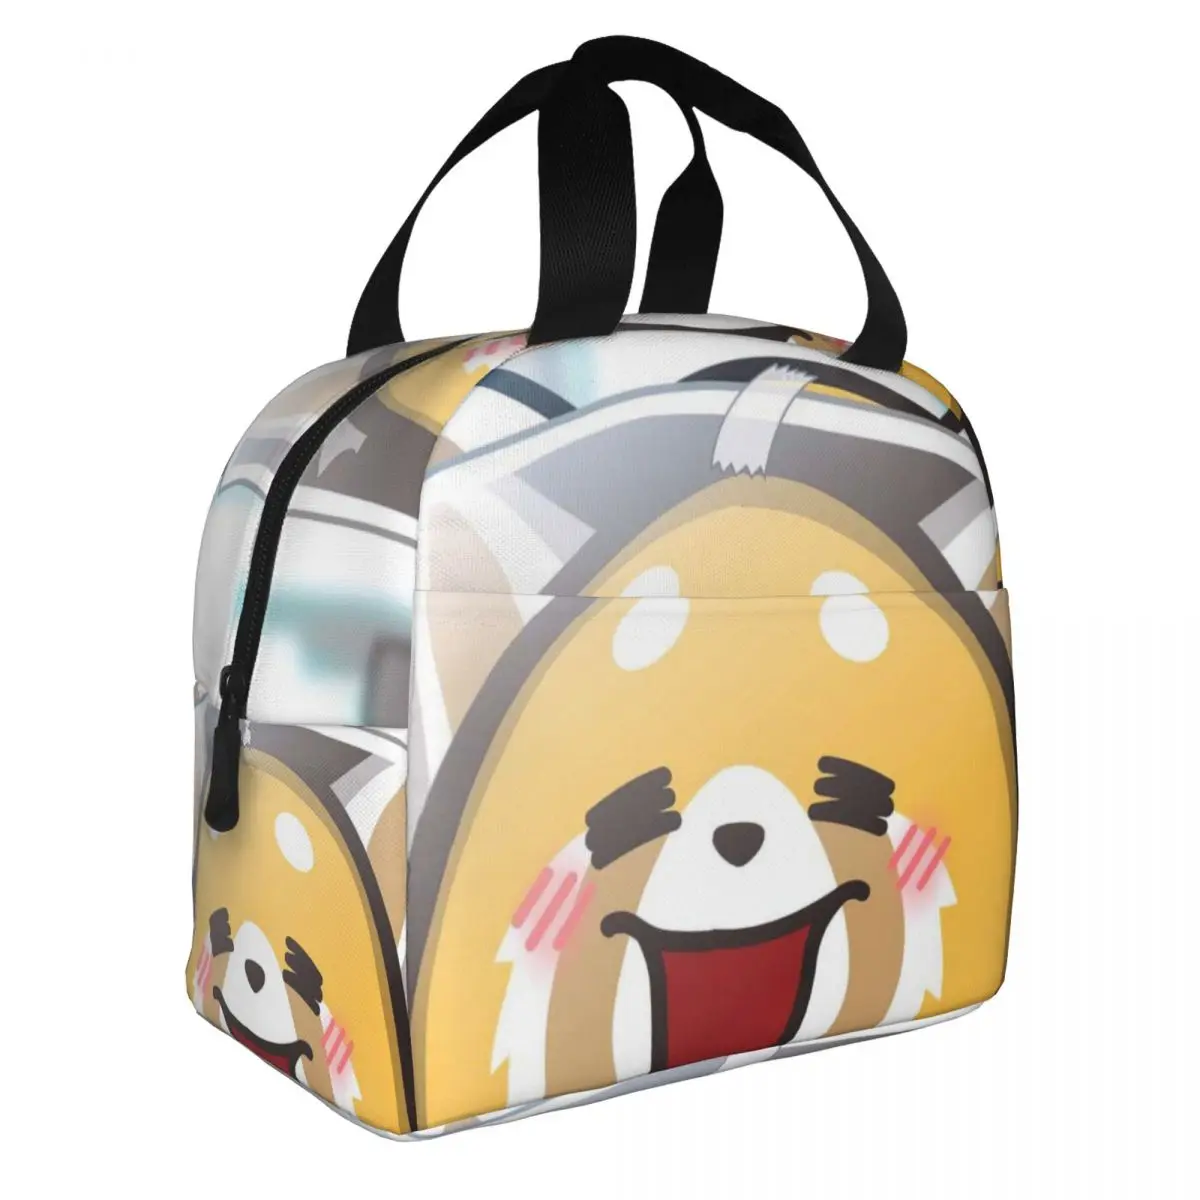 Aggretsuko Lunch Bento Bags Portable Aluminum Foil thickened Thermal Cloth Lunch Bag for Women Men Boy